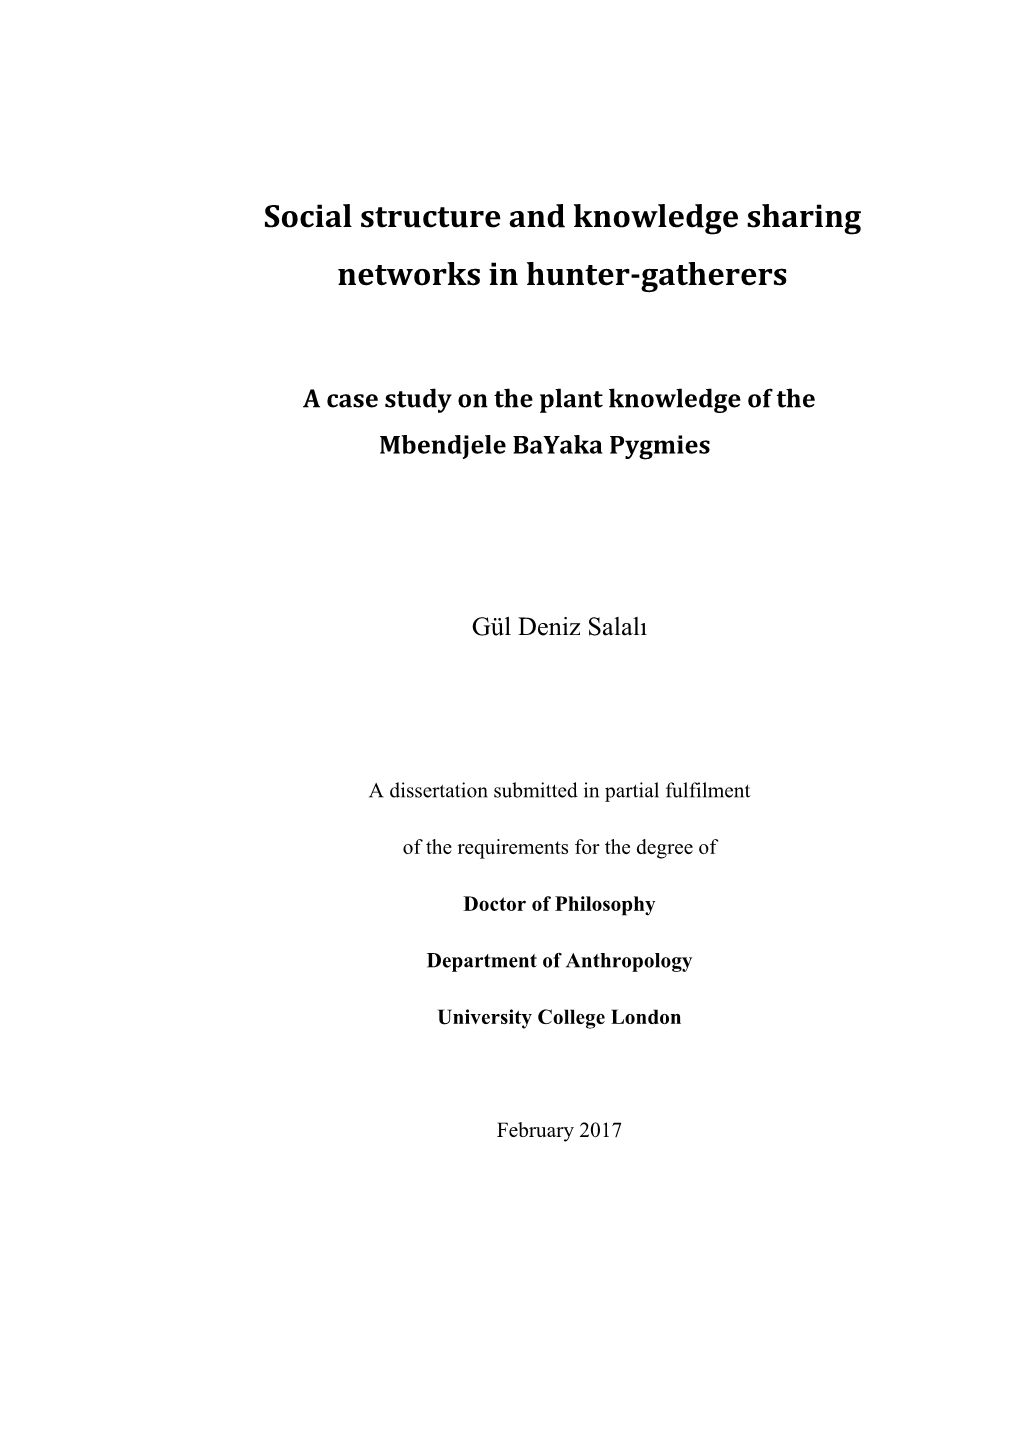 Social Structure and Knowledge Sharing Networks in Hunter-Gatherers